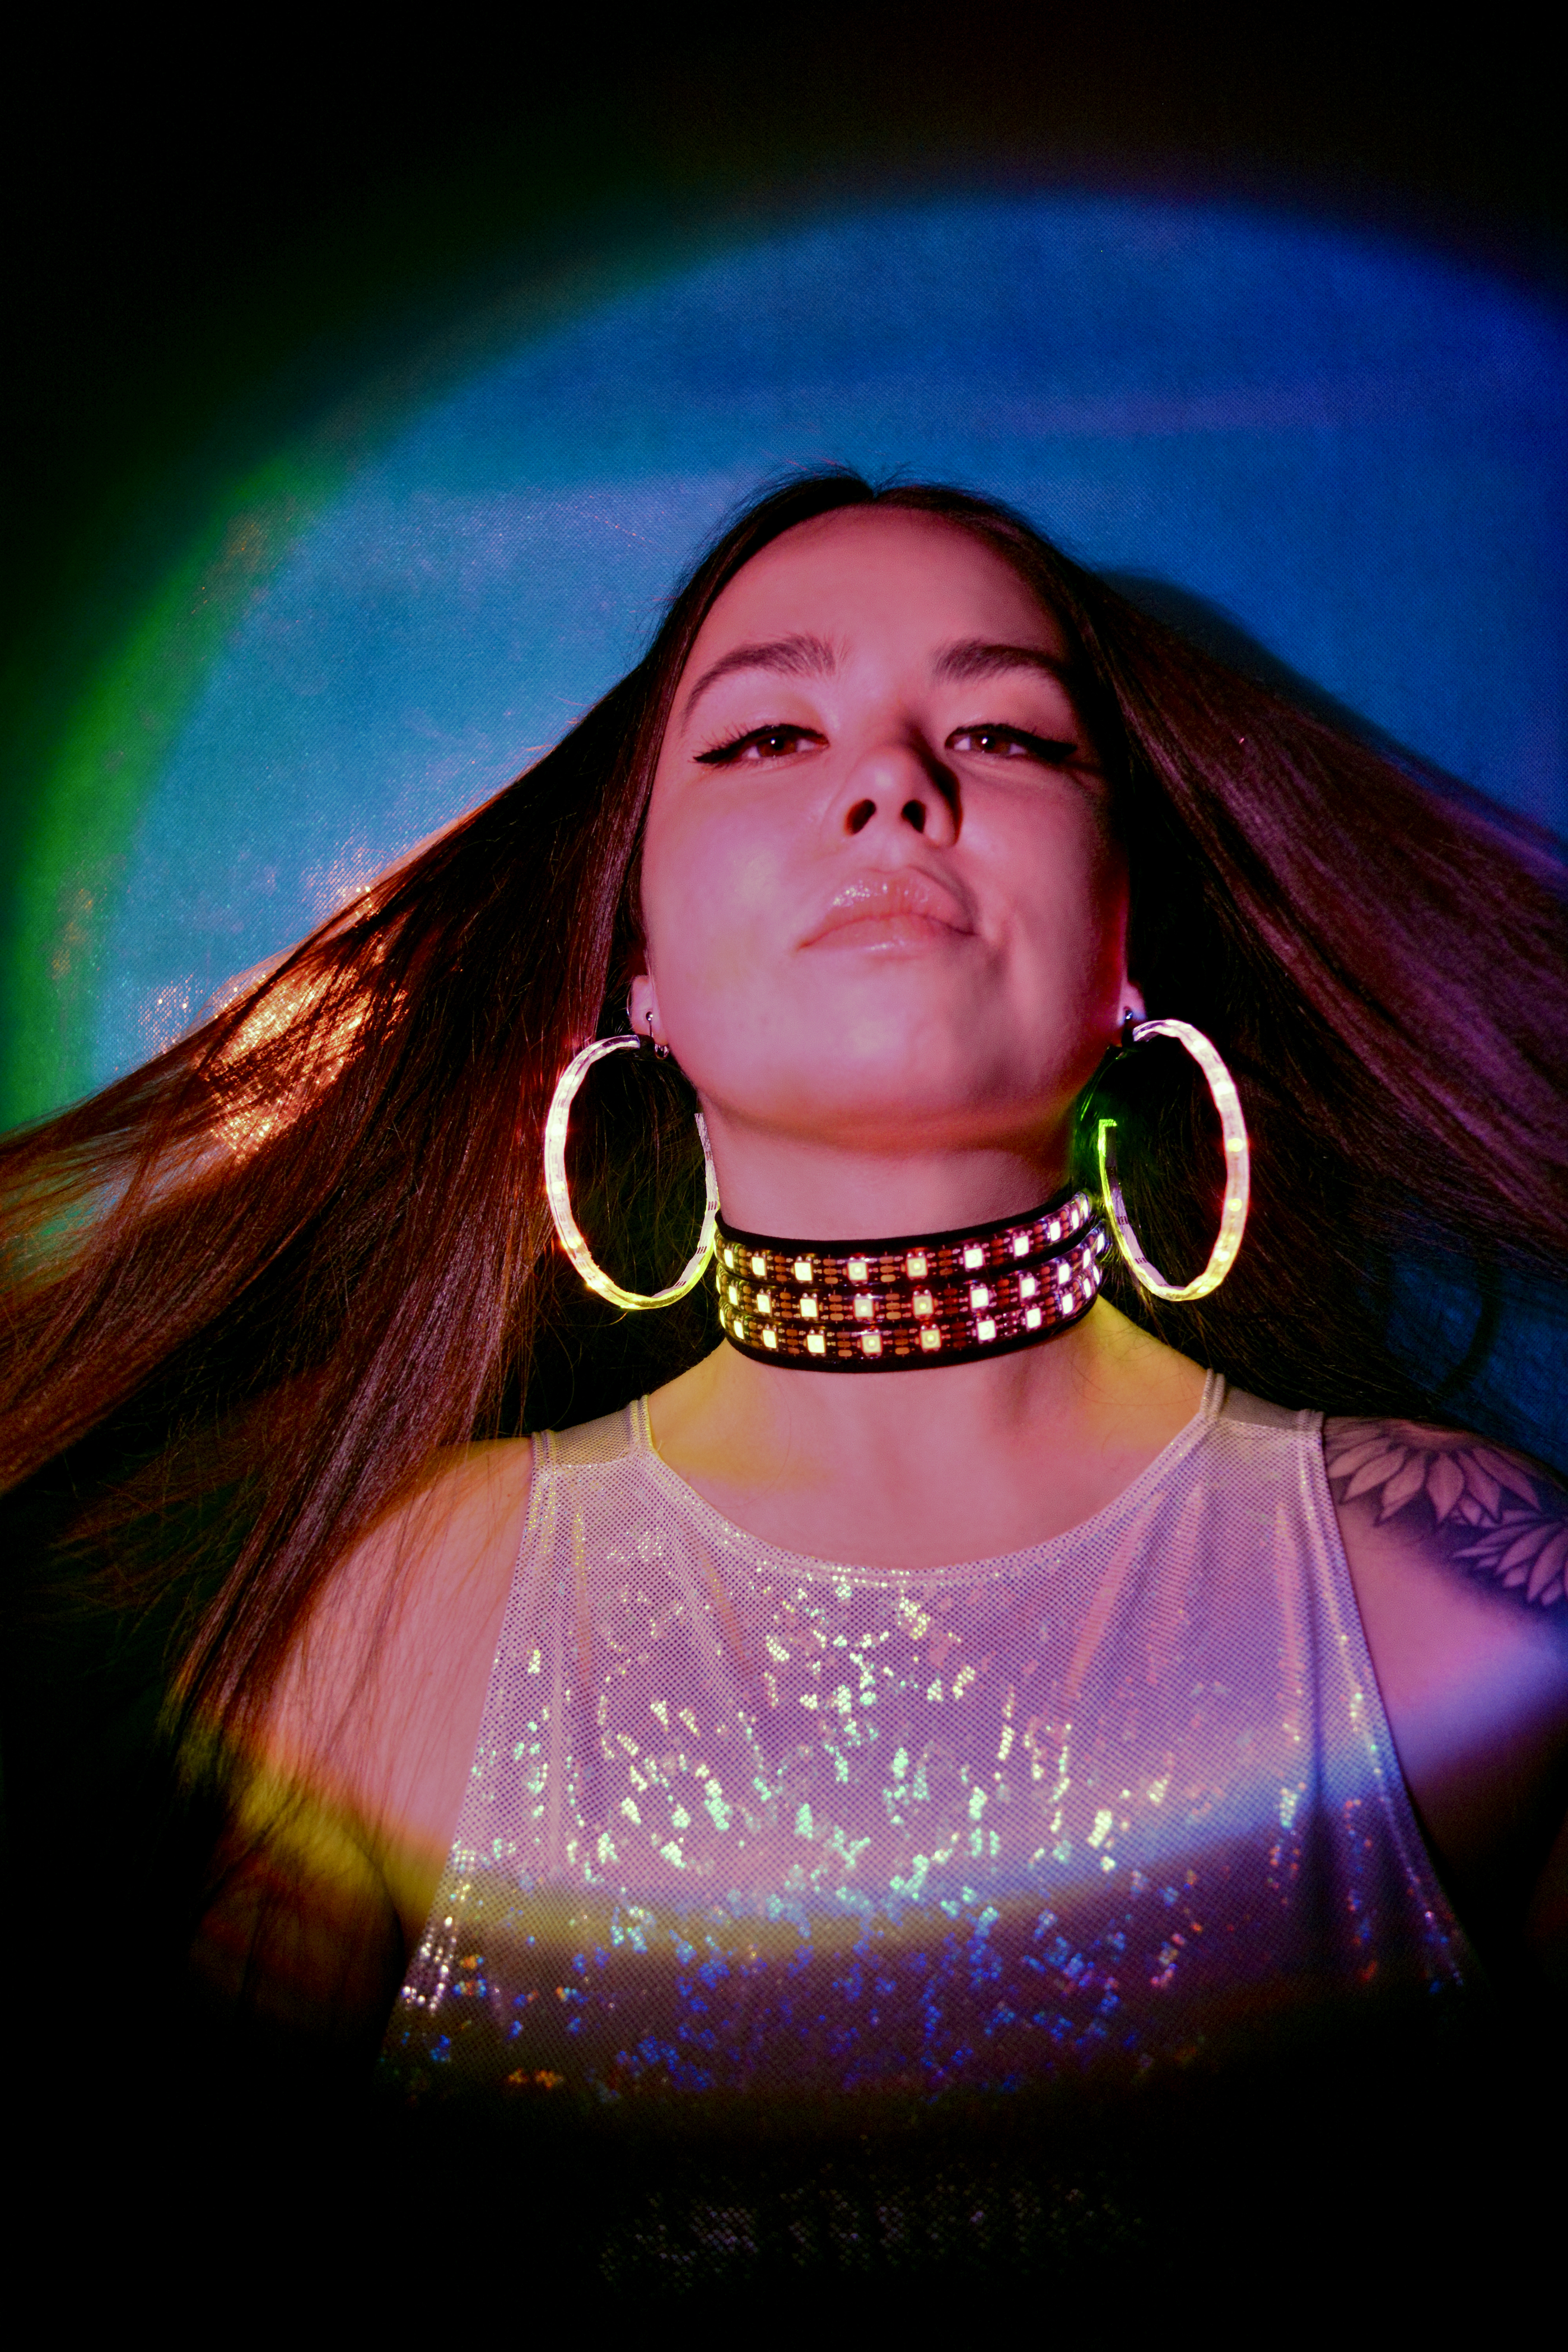 model with long brown hair wearing the led earrings & choker w/ a blue background